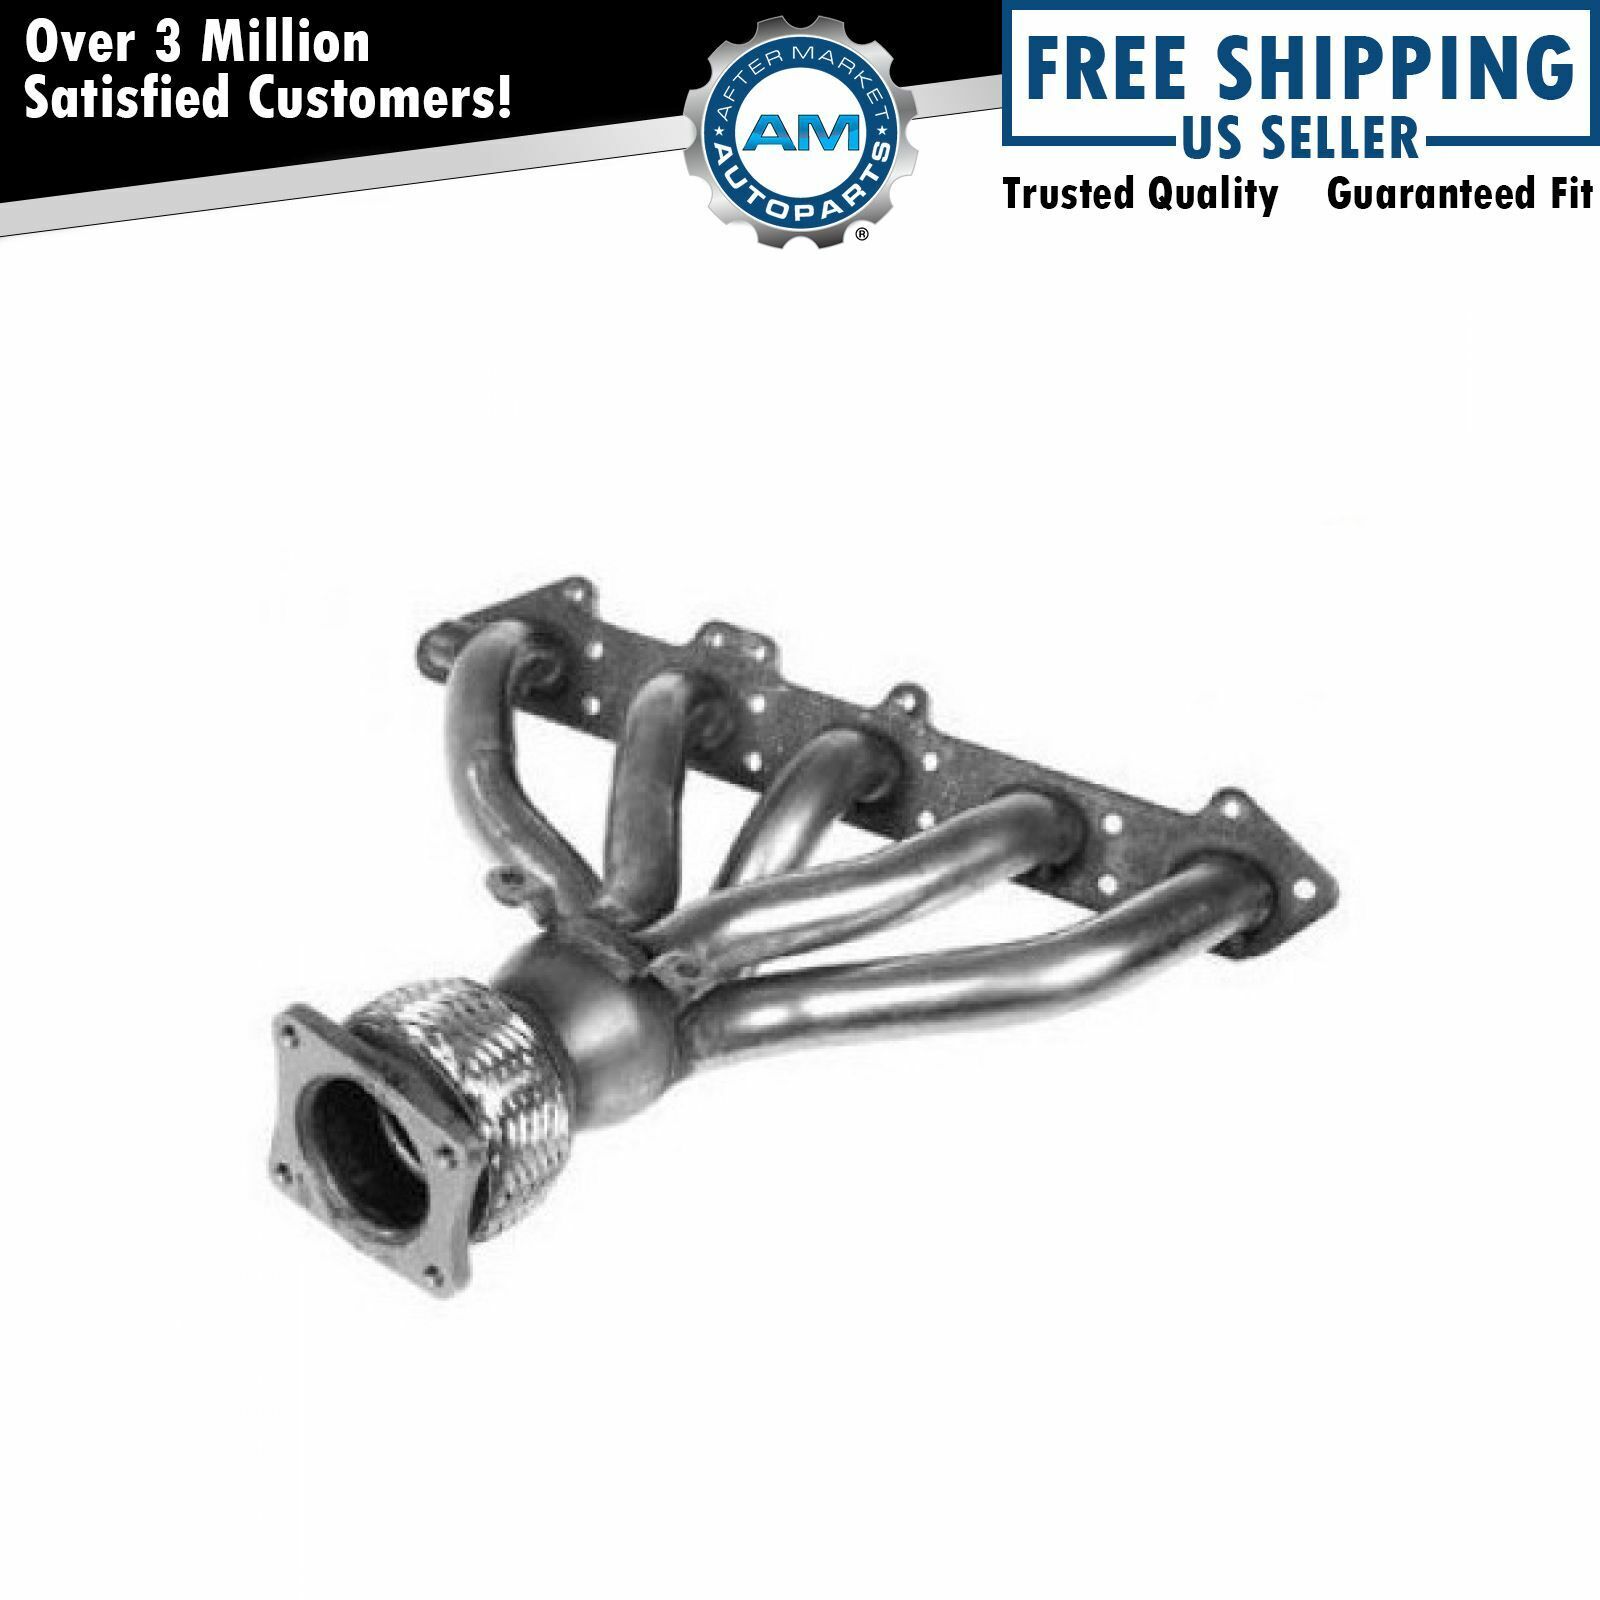 Exhaust Manifold NEW for Volvo 850 C70 S70 2.4L 5 Cylinder 20 Valve Engine